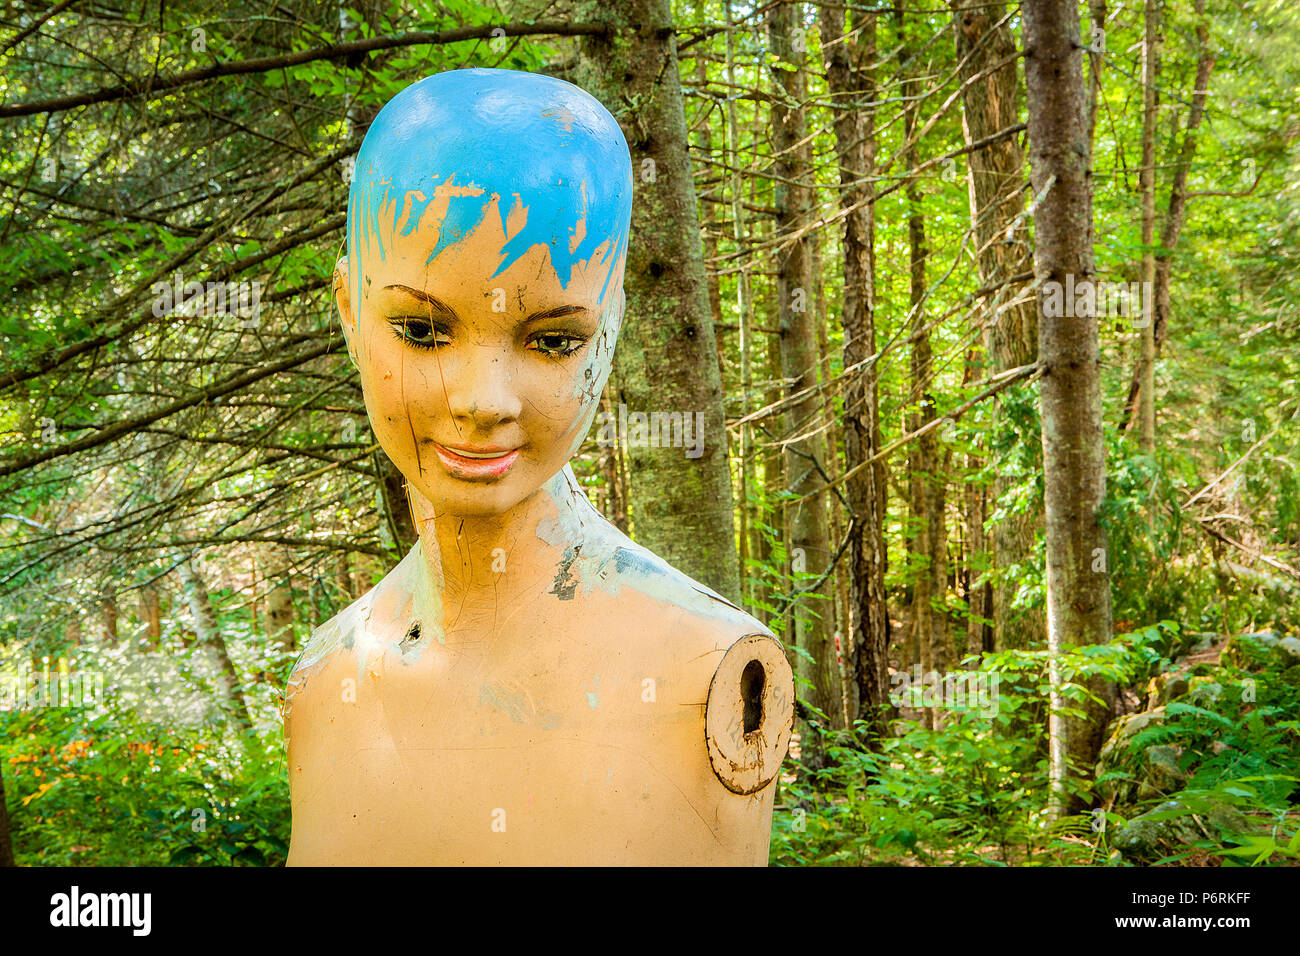 A damaged, painted, abandoned mannequin stands outdoors in a forest. Stock Photo